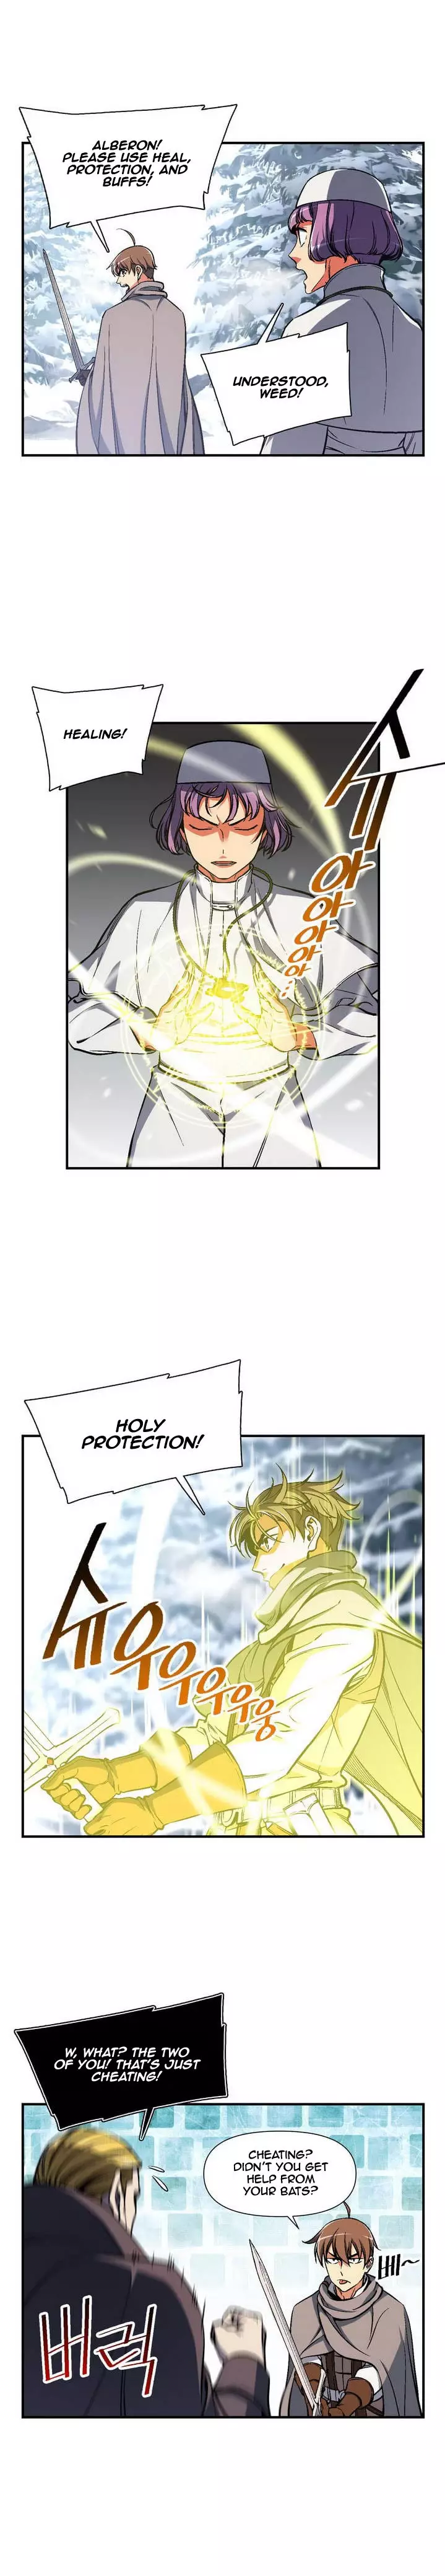 The Legendary Moonlight Sculptor - 80 page 4